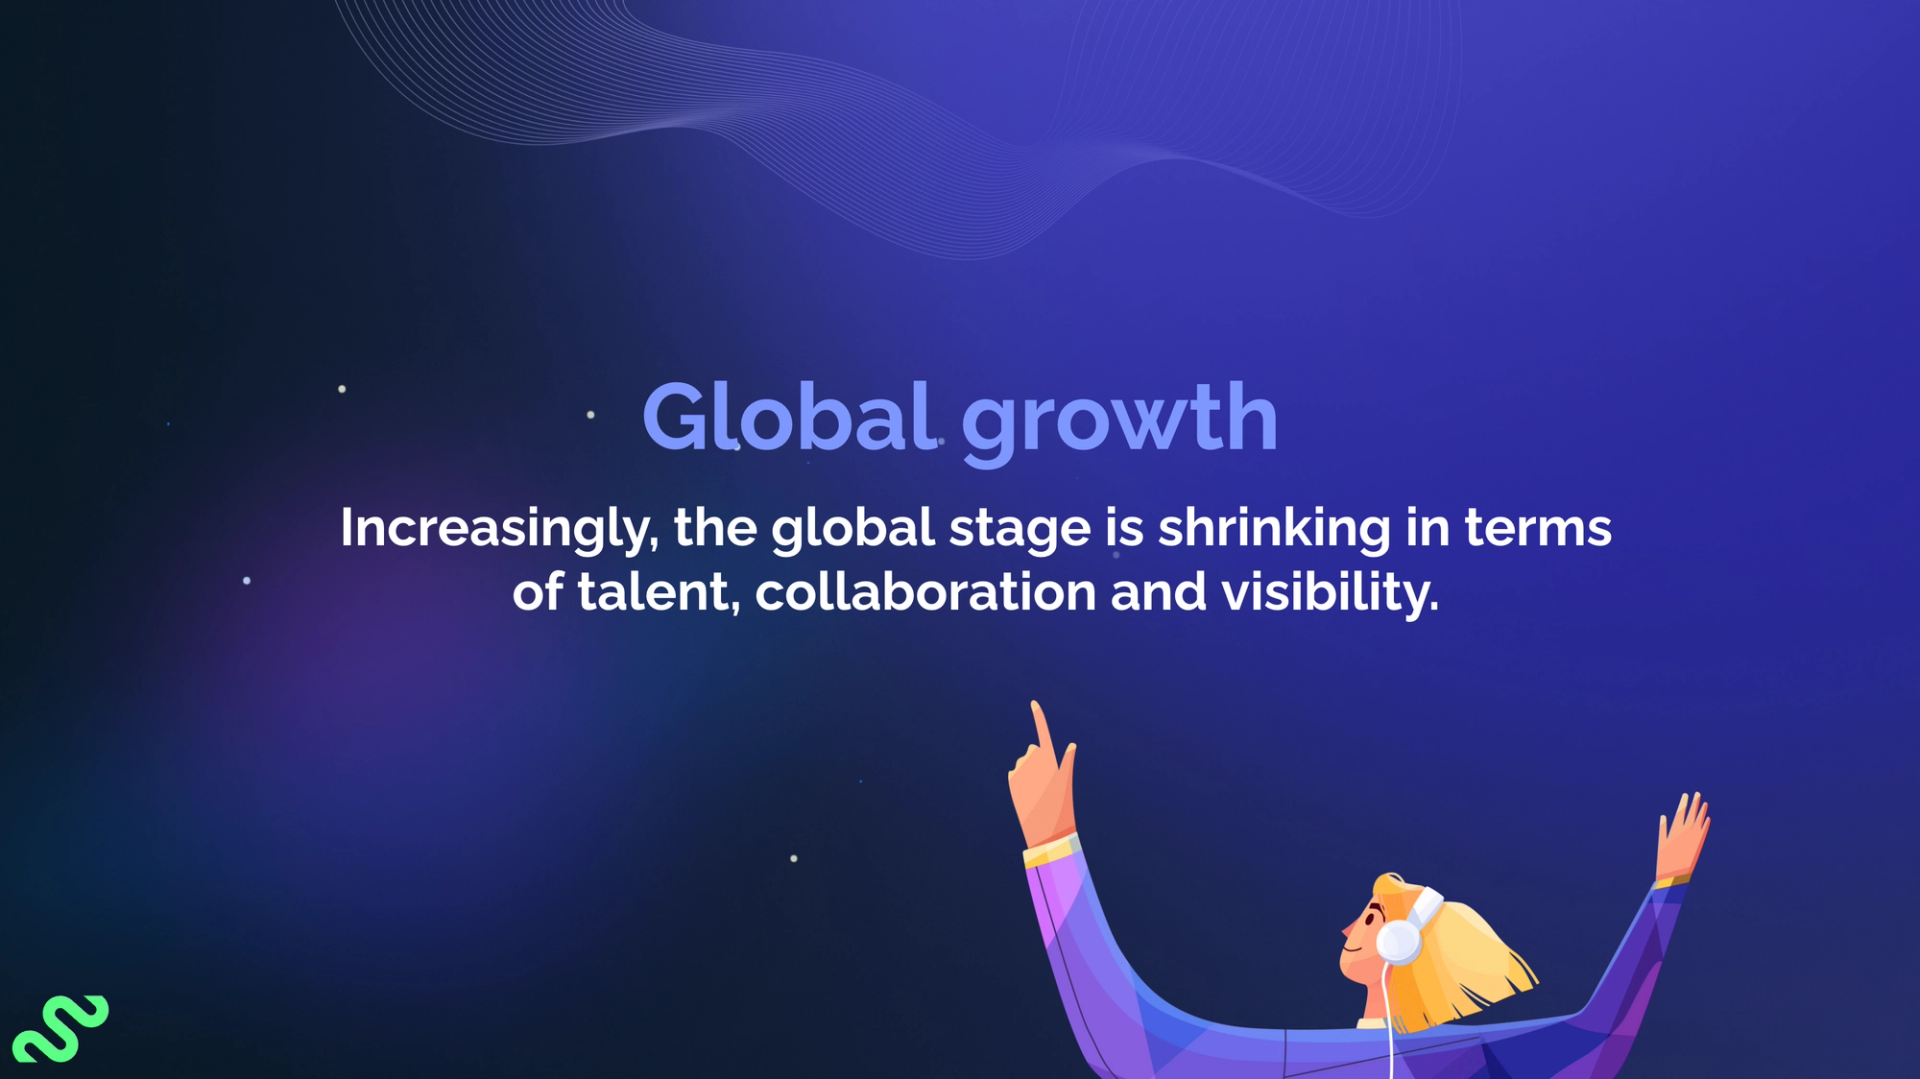 Global growth. Increasingly, the global stage is shrinking in terms of talent, collaboration and visibility.